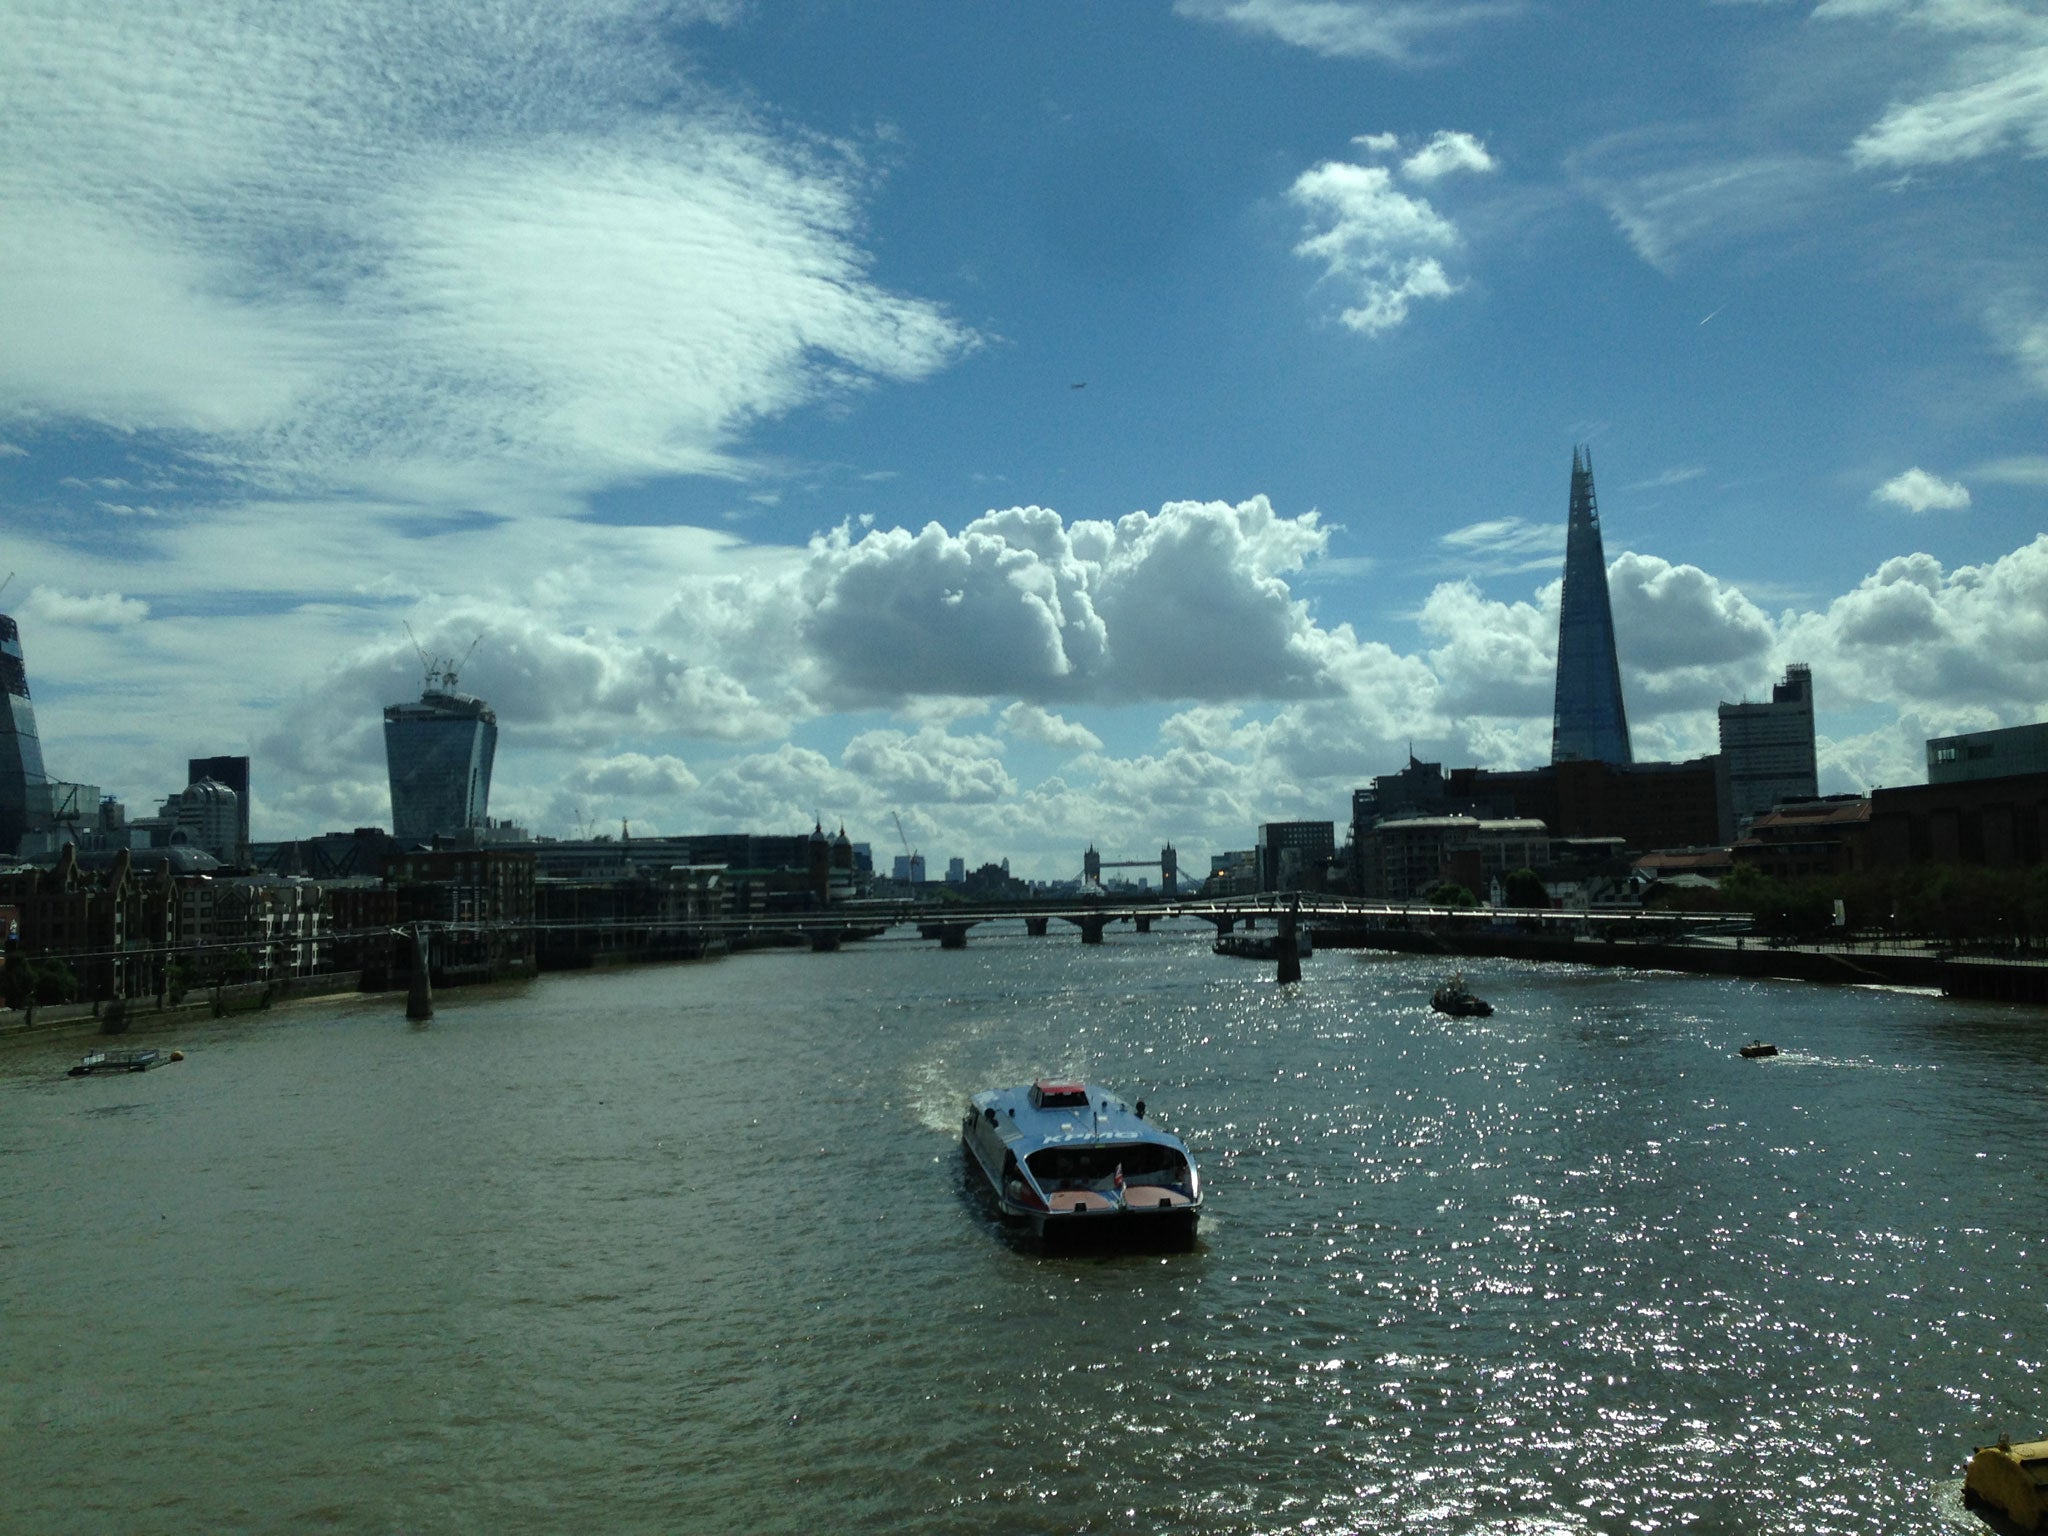 Bridging the gap: the view from Blackfriars station